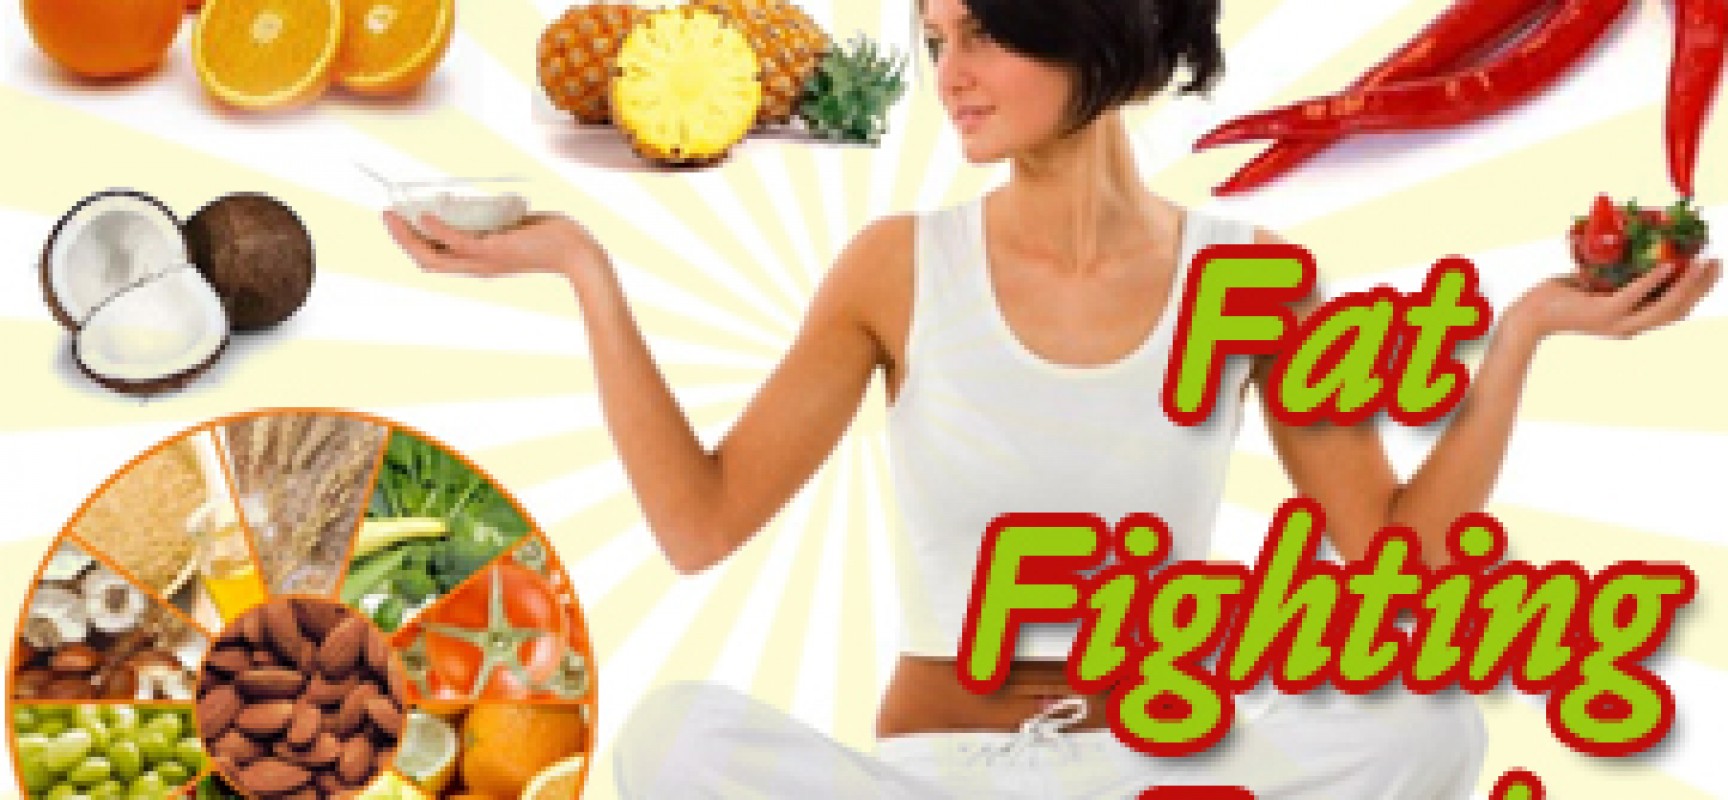 9 FAT FIGHTING MEALS